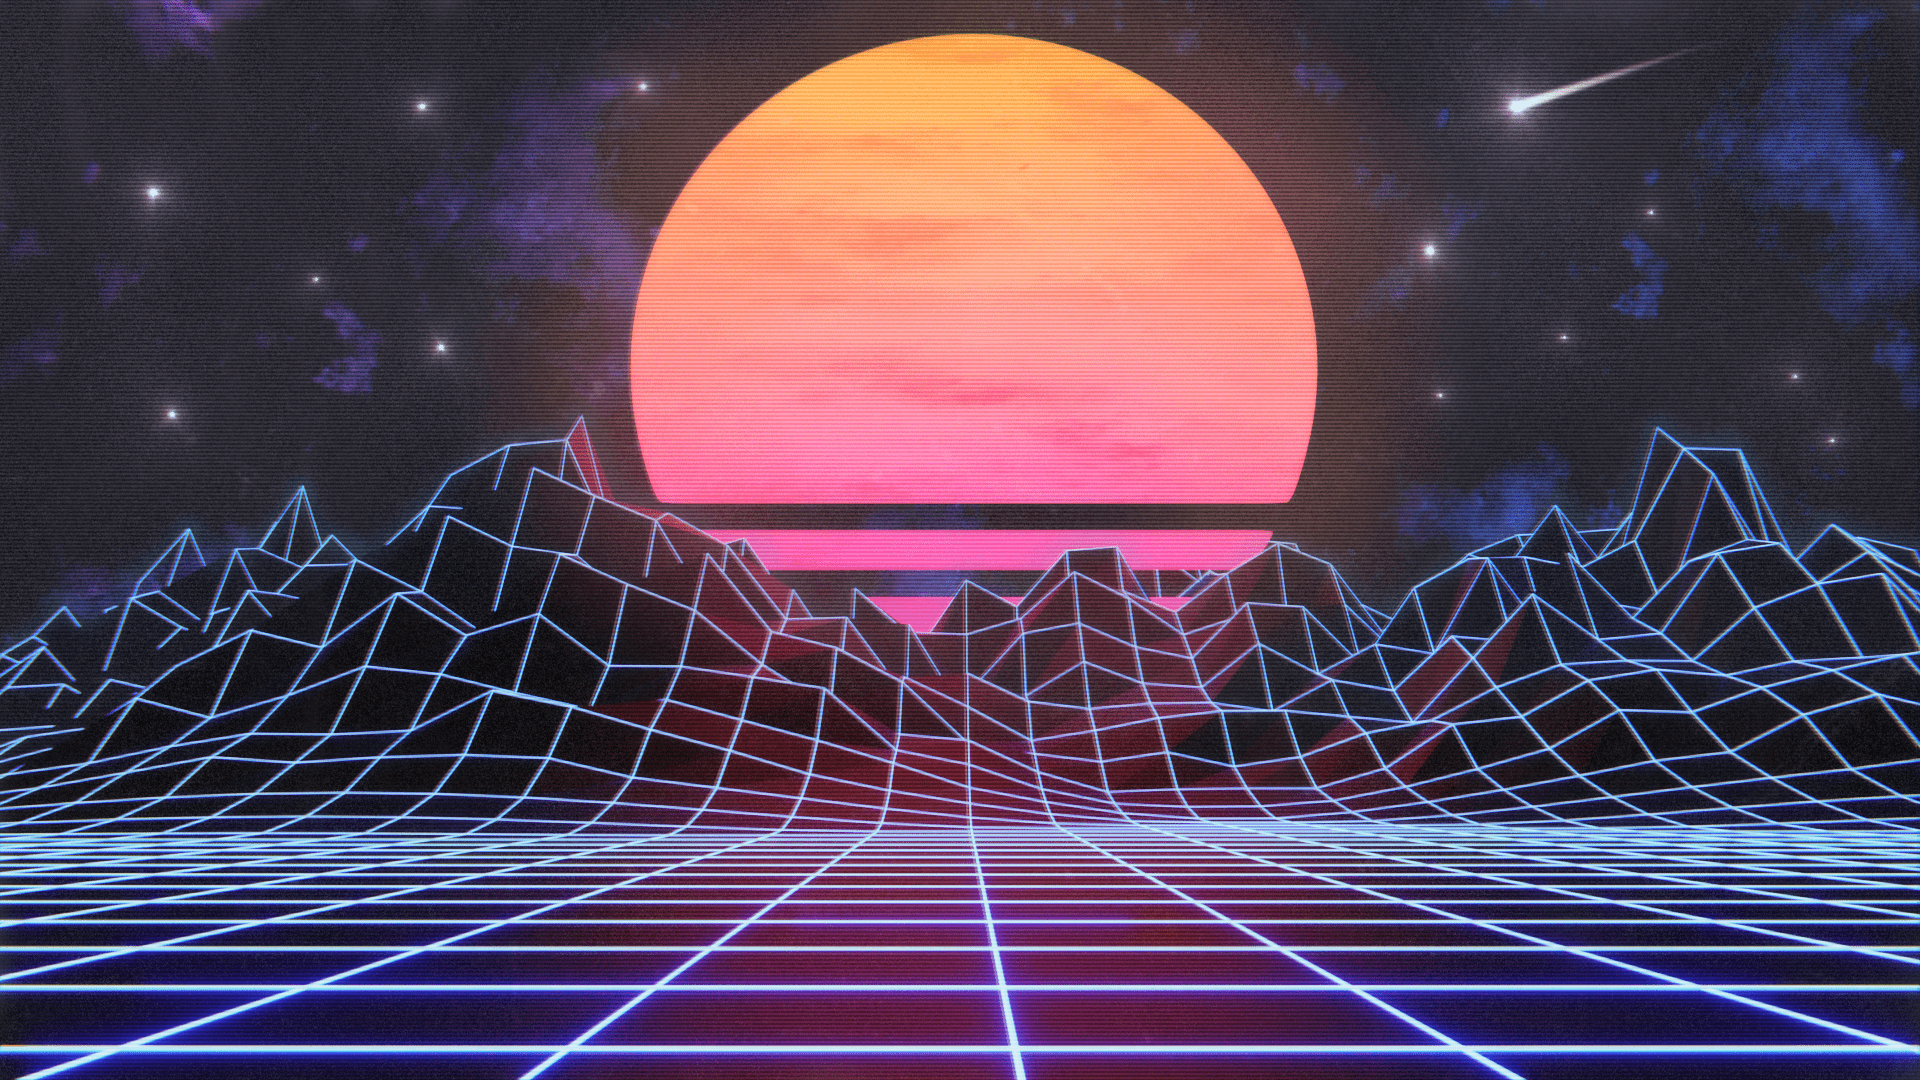 A retro looking sunset with mountains in the background - Synthwave